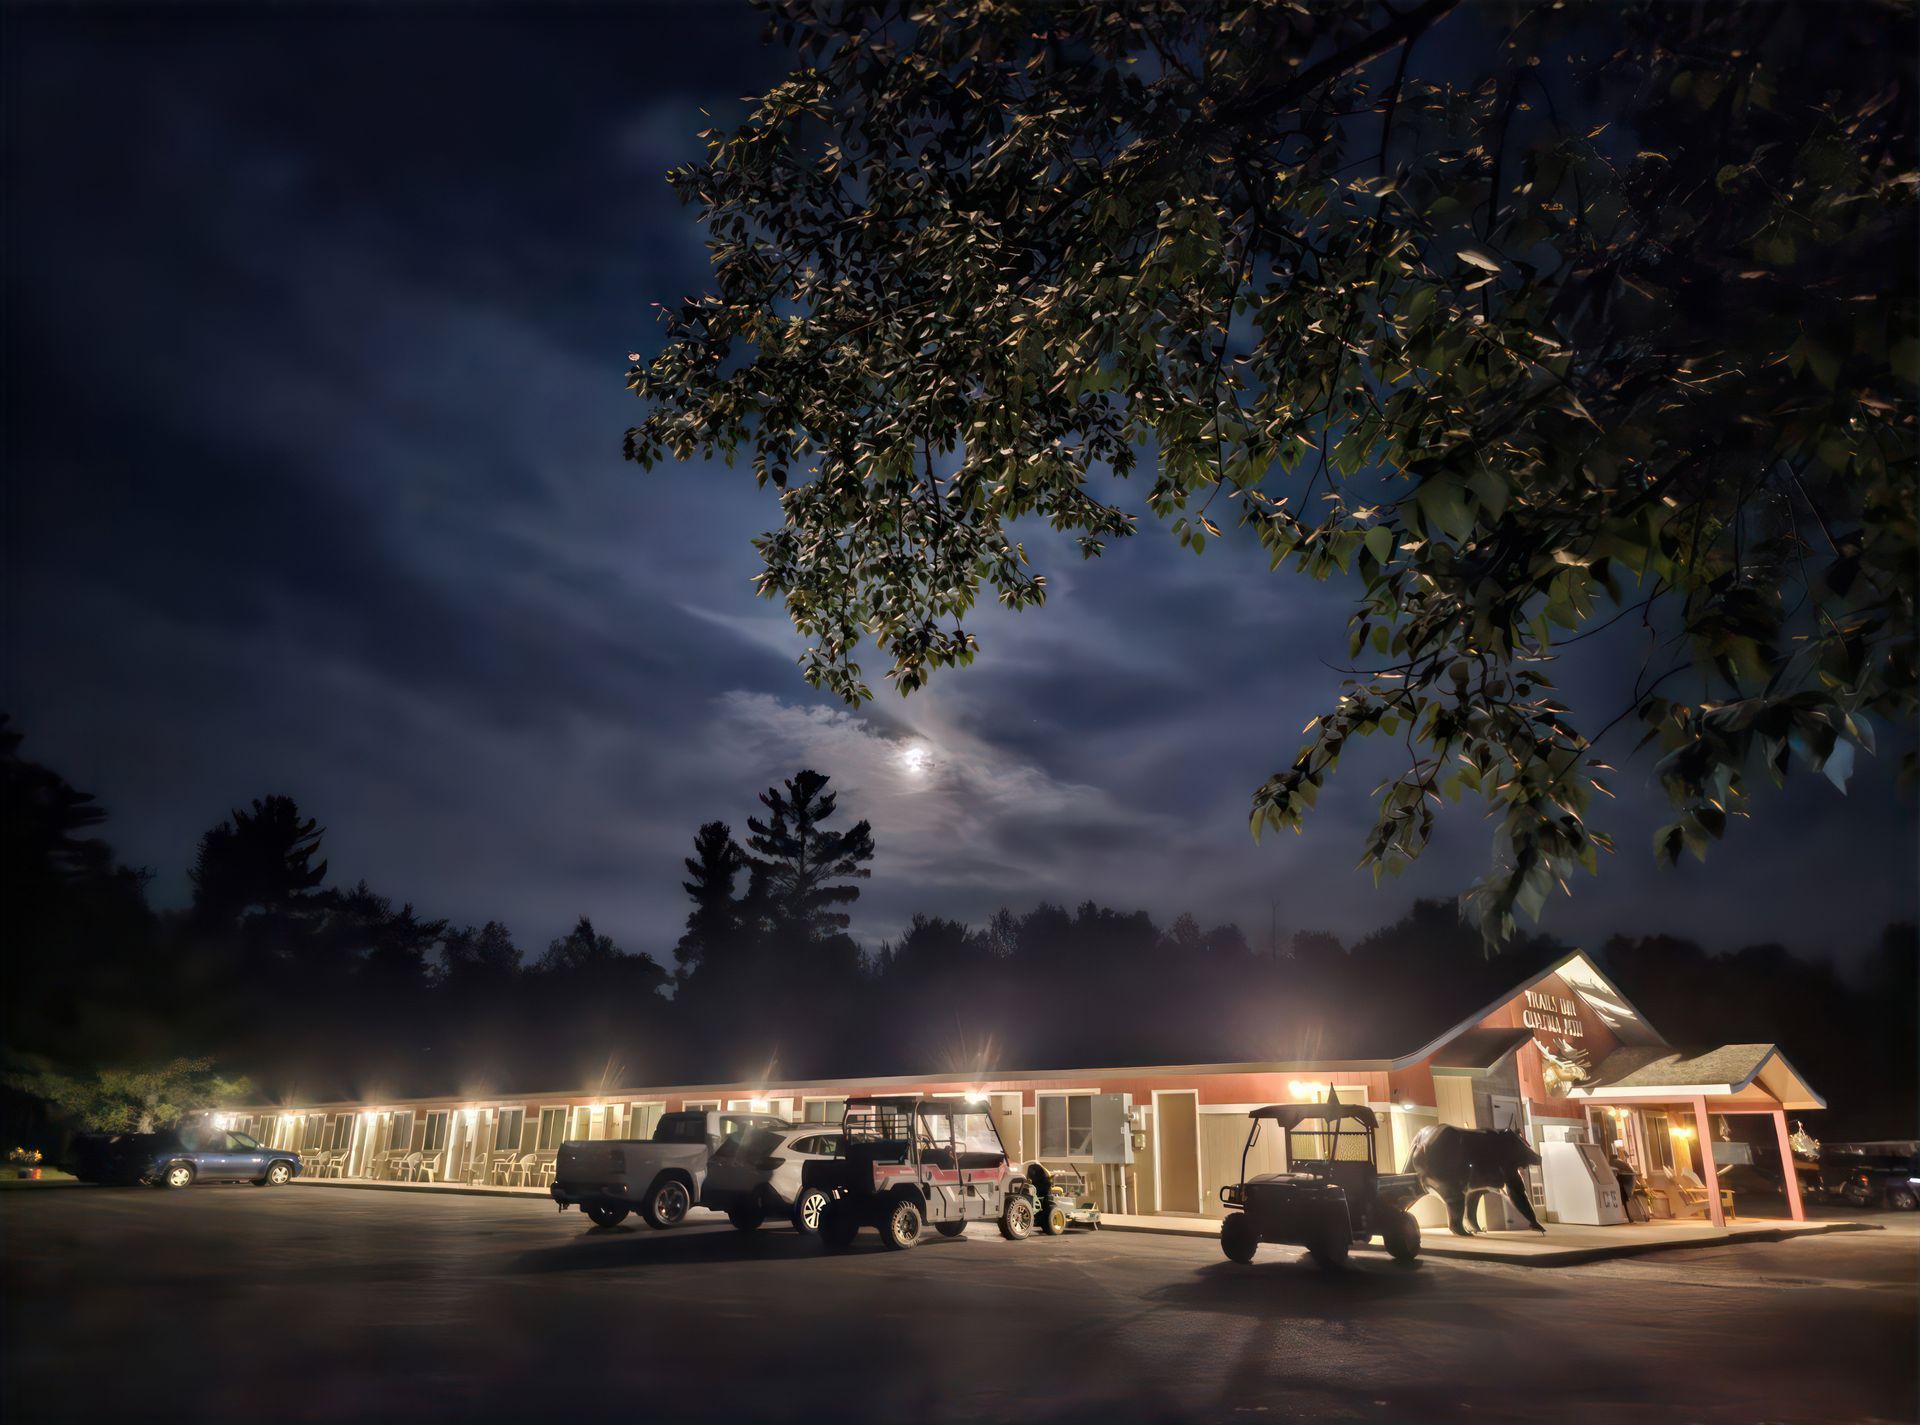 A moonlit night image of the Trails Inn Quadna Motel in Hill City, MN.